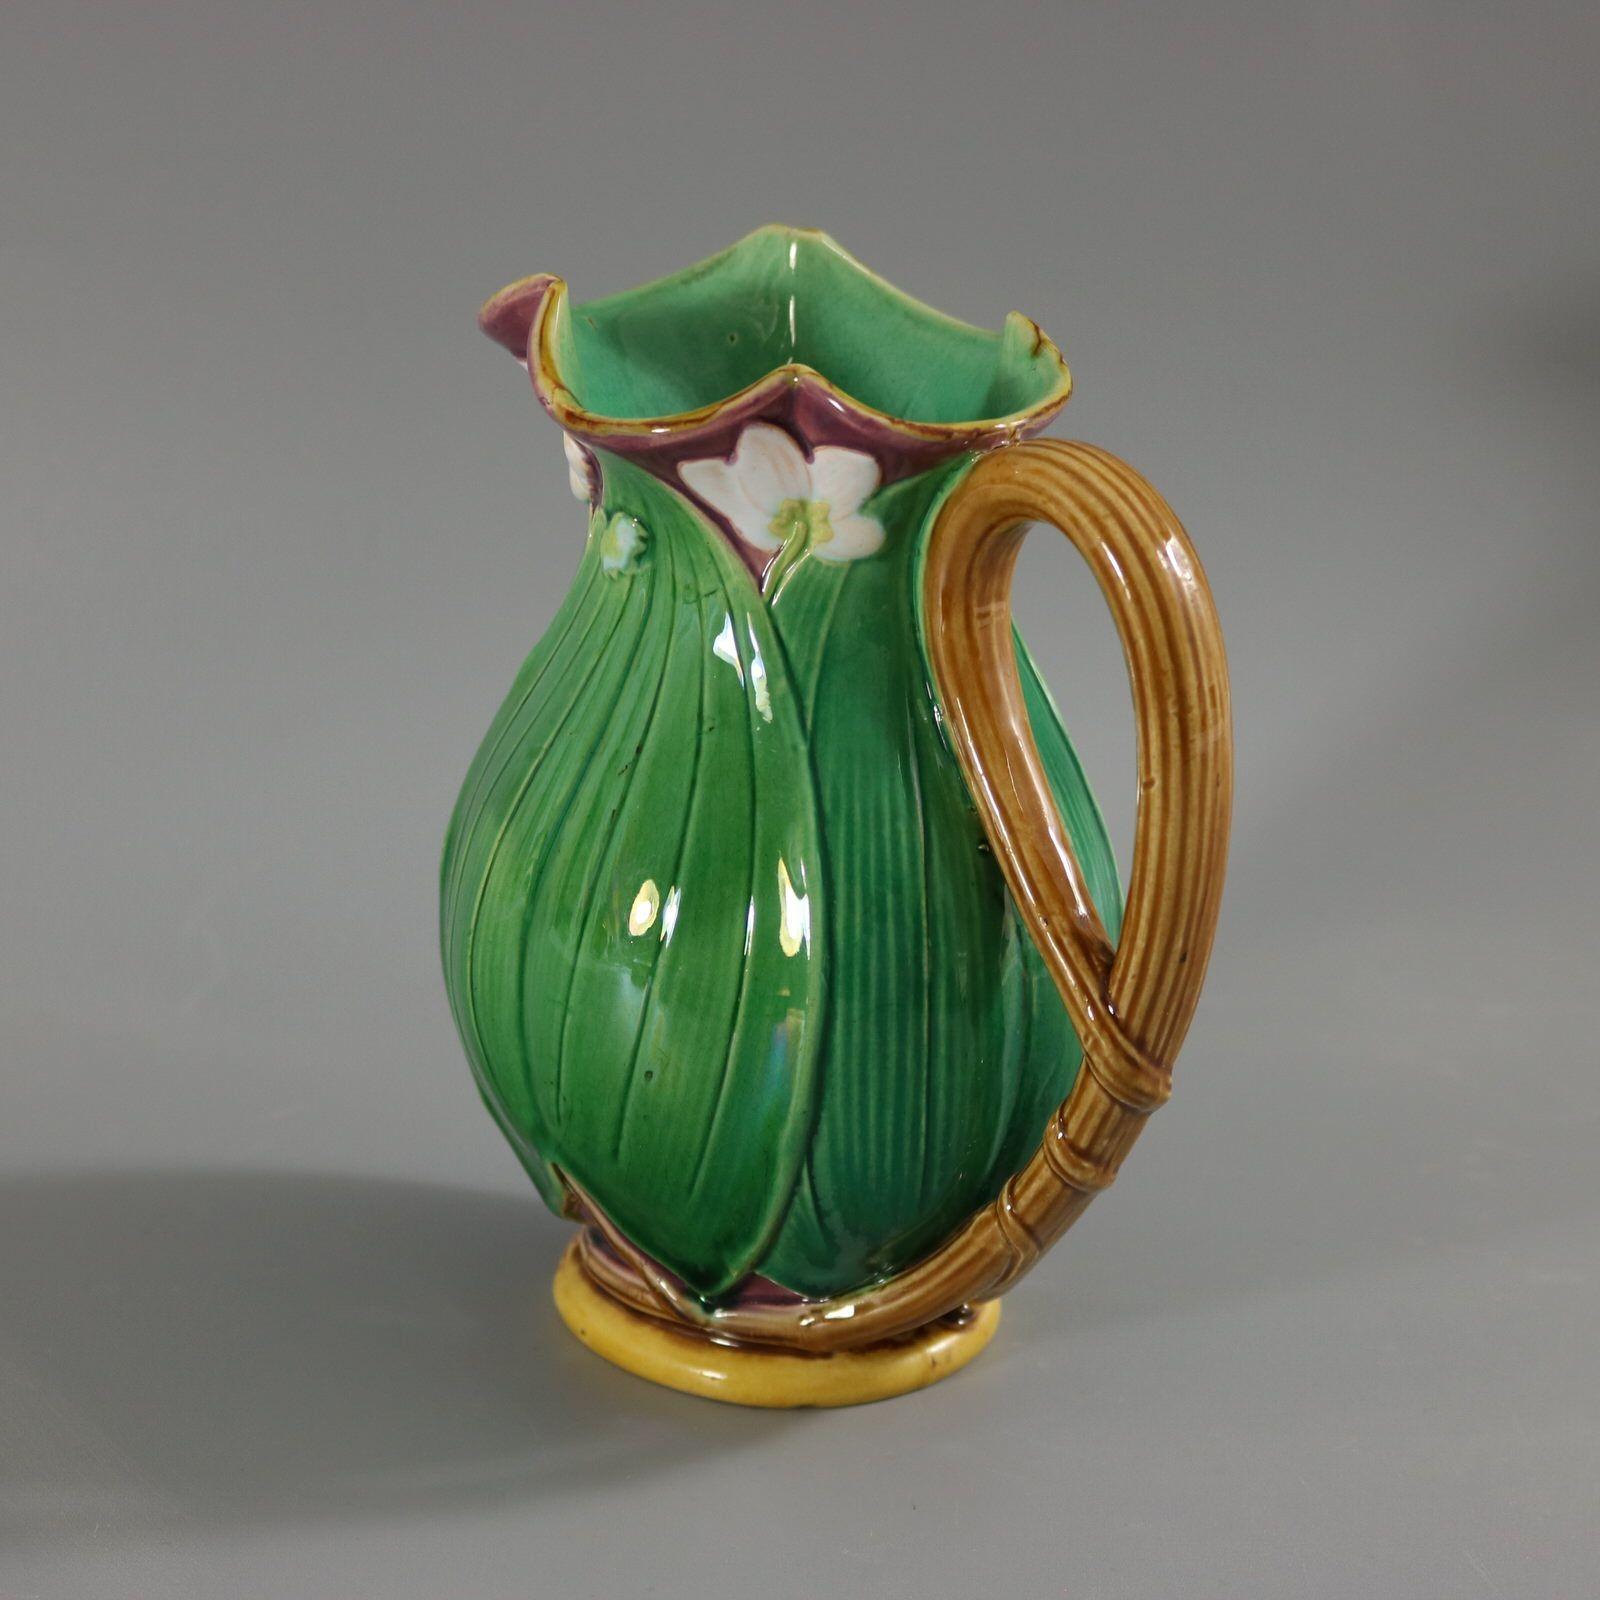 Minton Majolica jug/pitcher which features flowering lilies and lily pads. Colouration: green, white, dark pink, are predominant. The piece bears maker's marks for the Minton pottery. Bears a pattern number, '1228'.